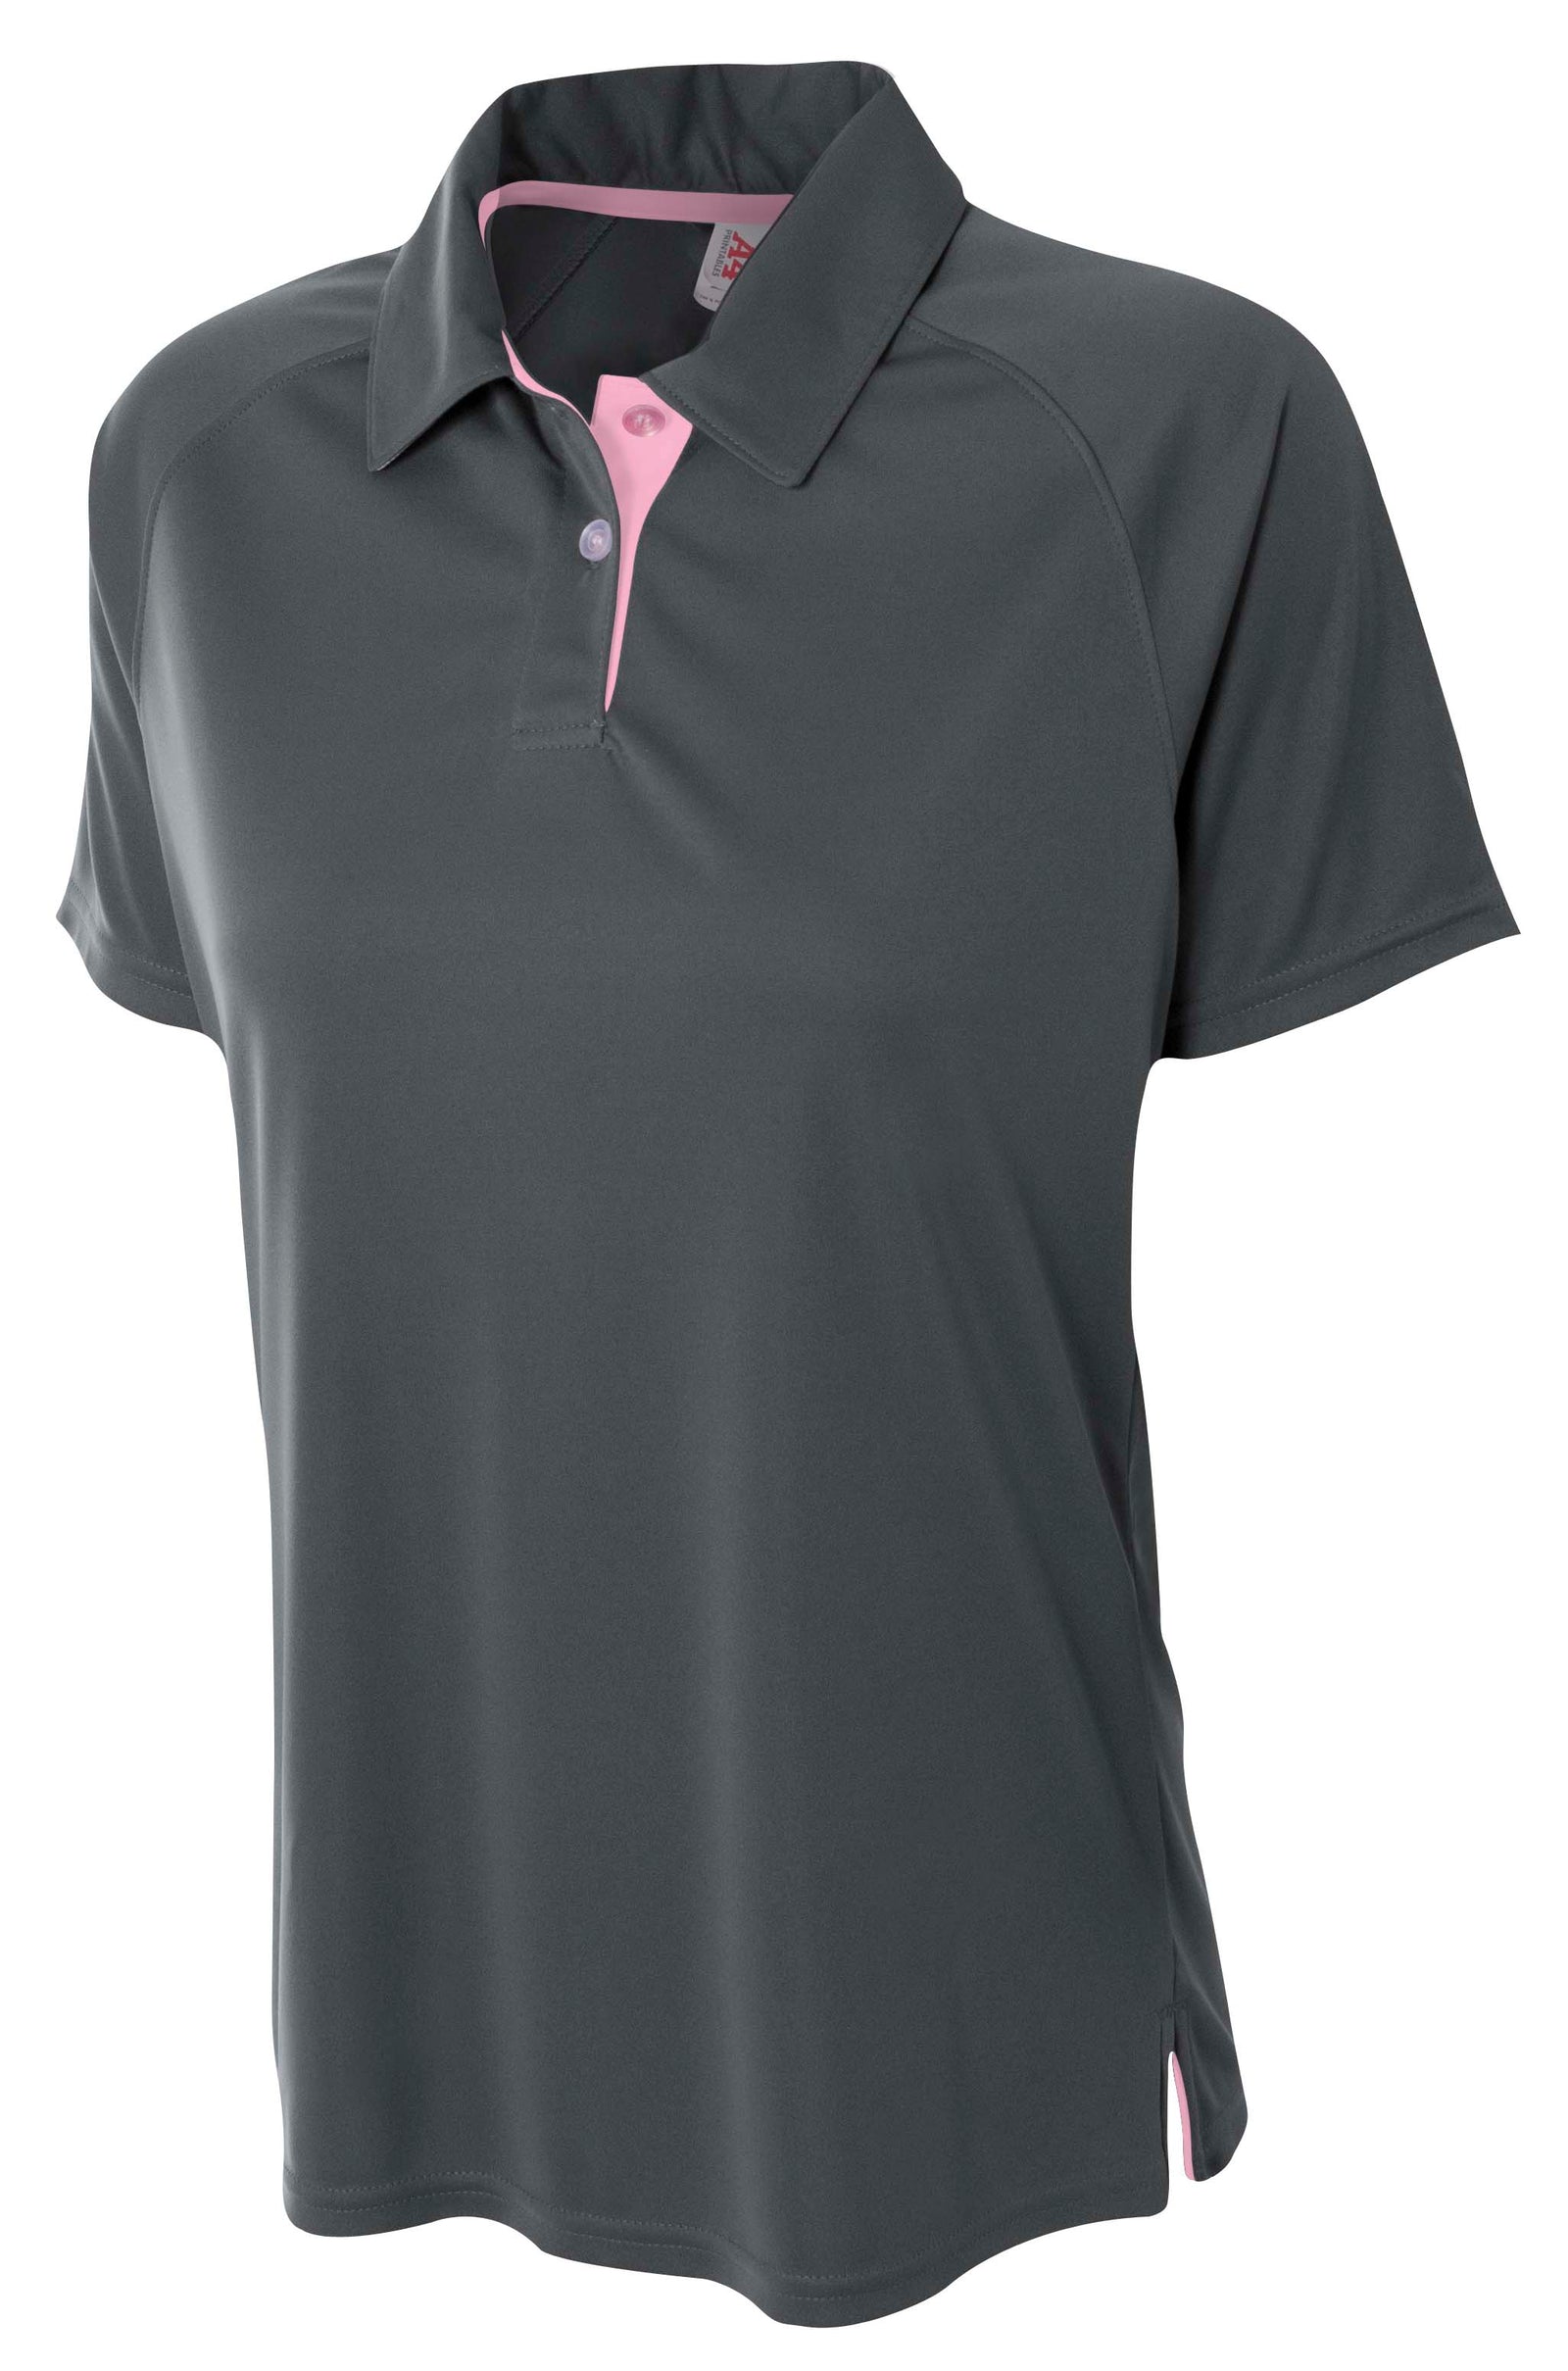 Graphite/pink A4 Contrast Polo